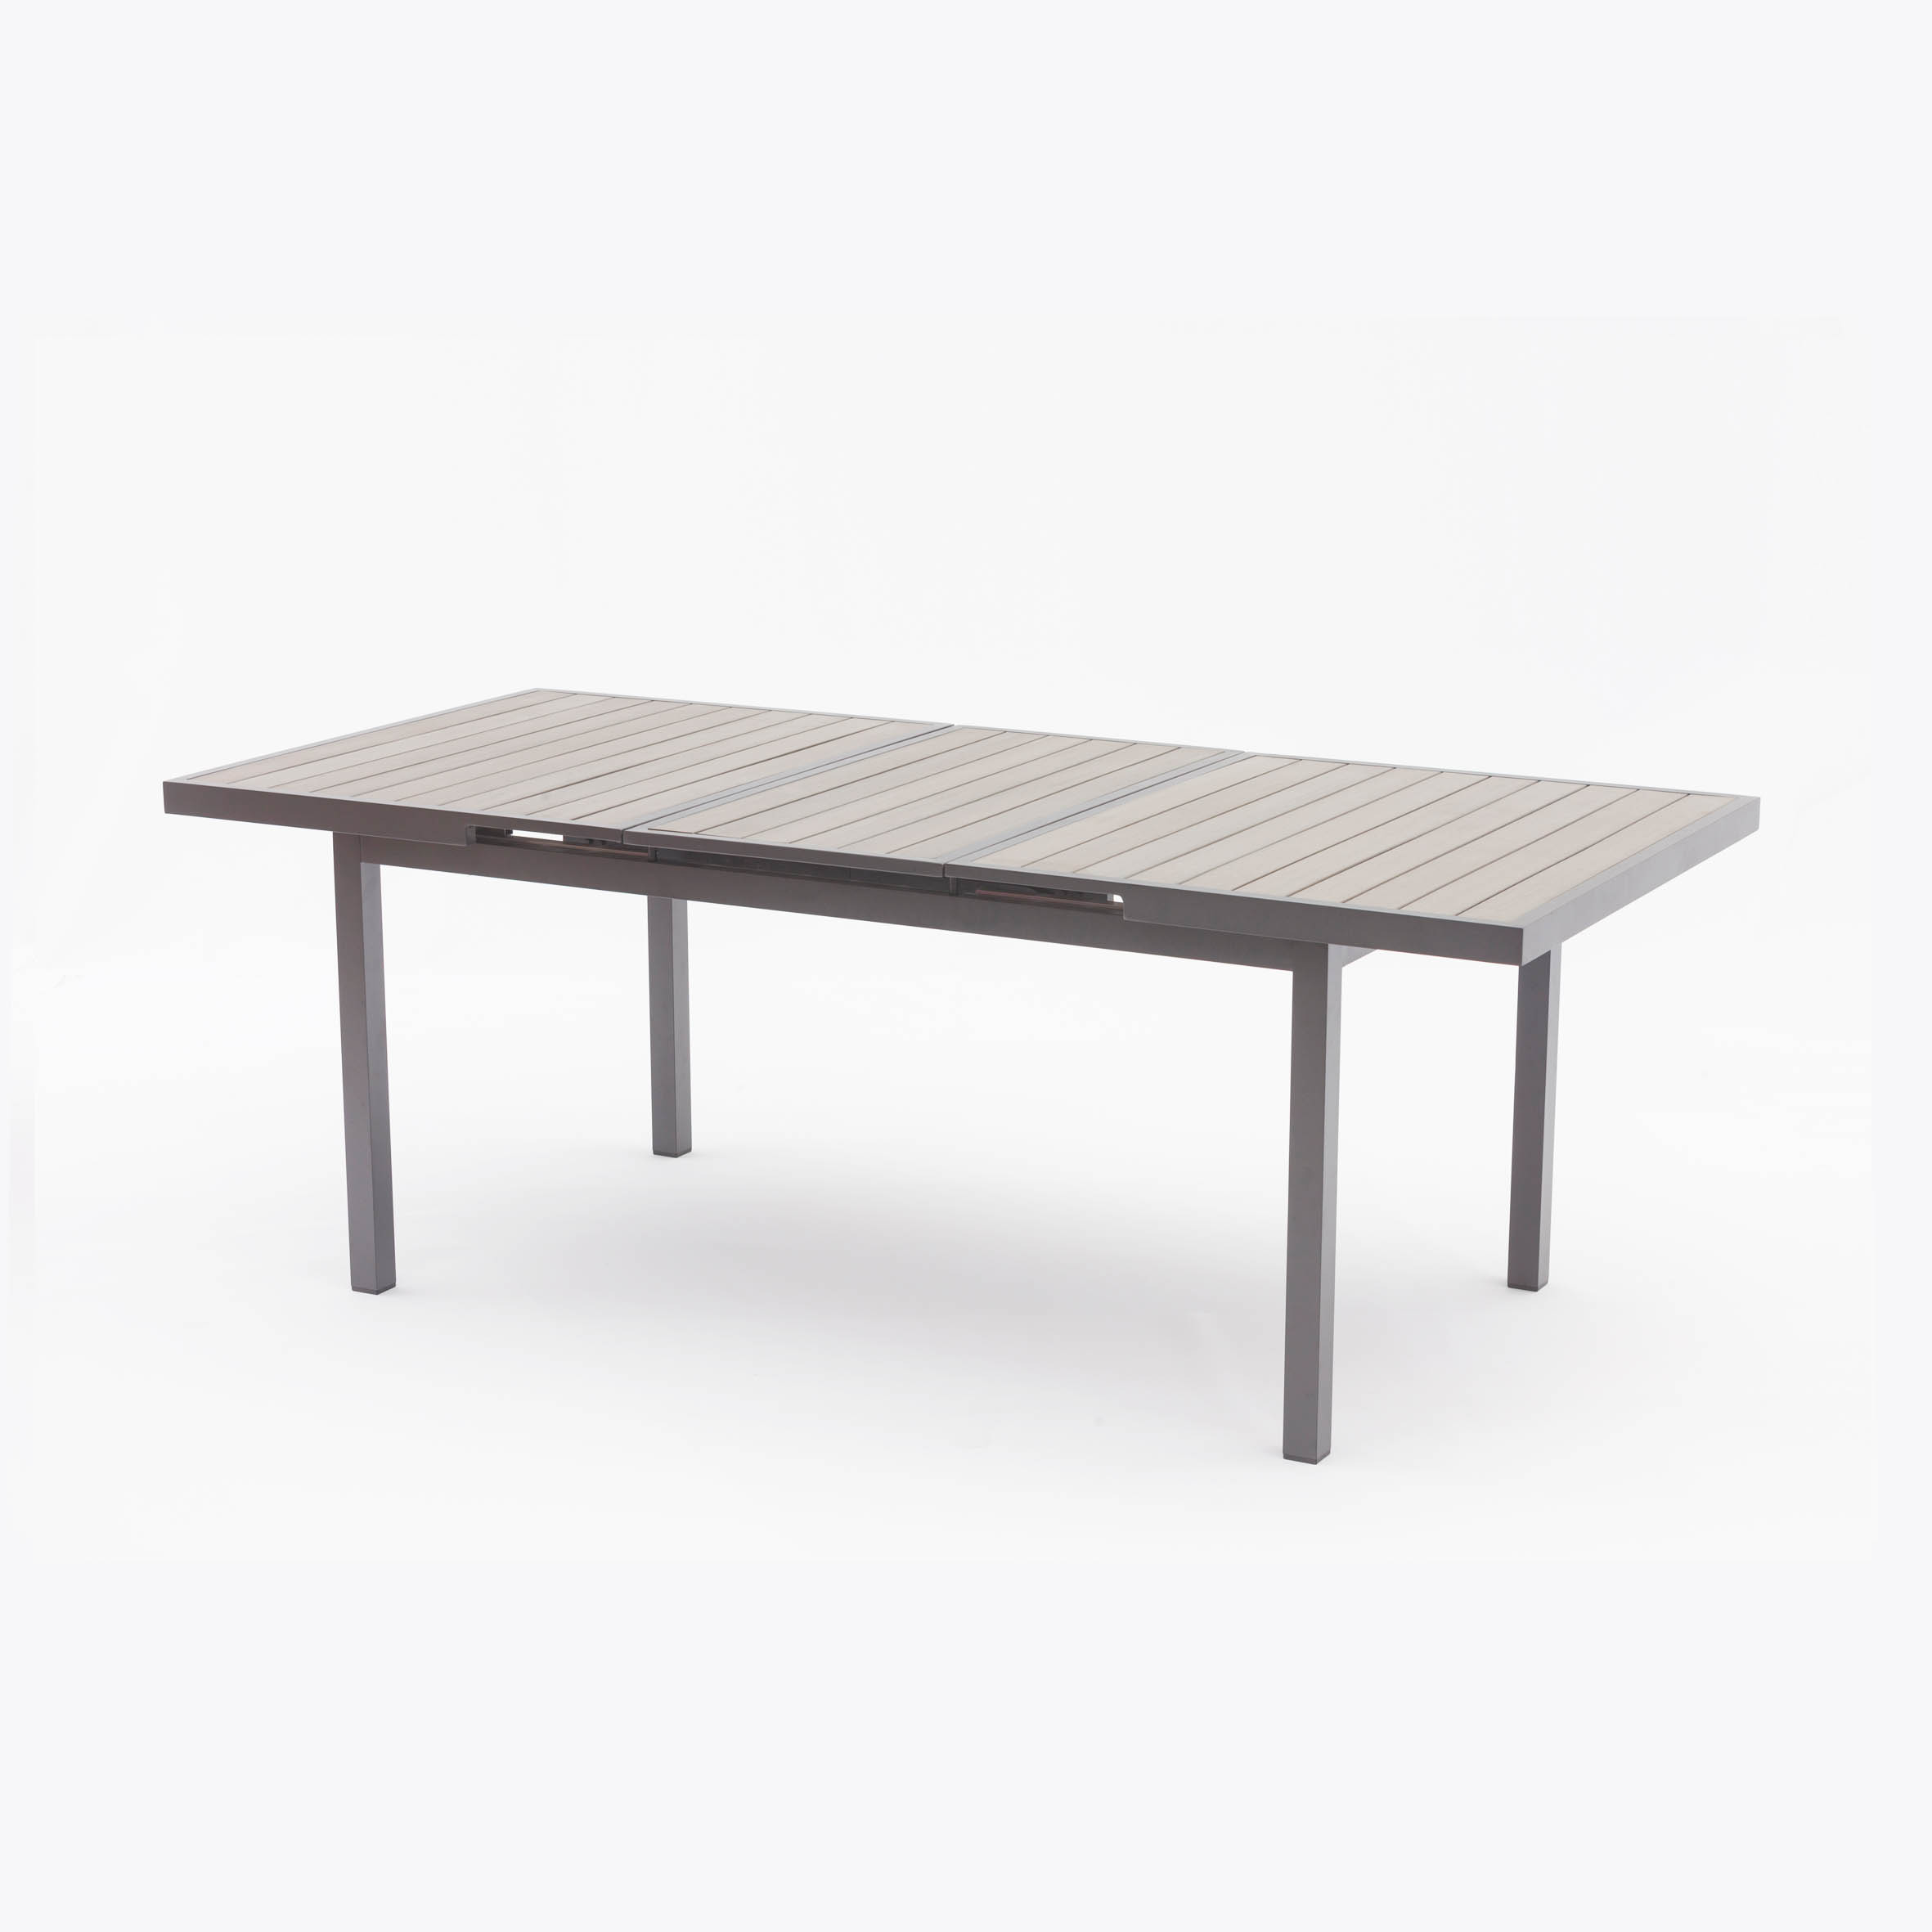 Vienna extension table(poly-wood top)S6